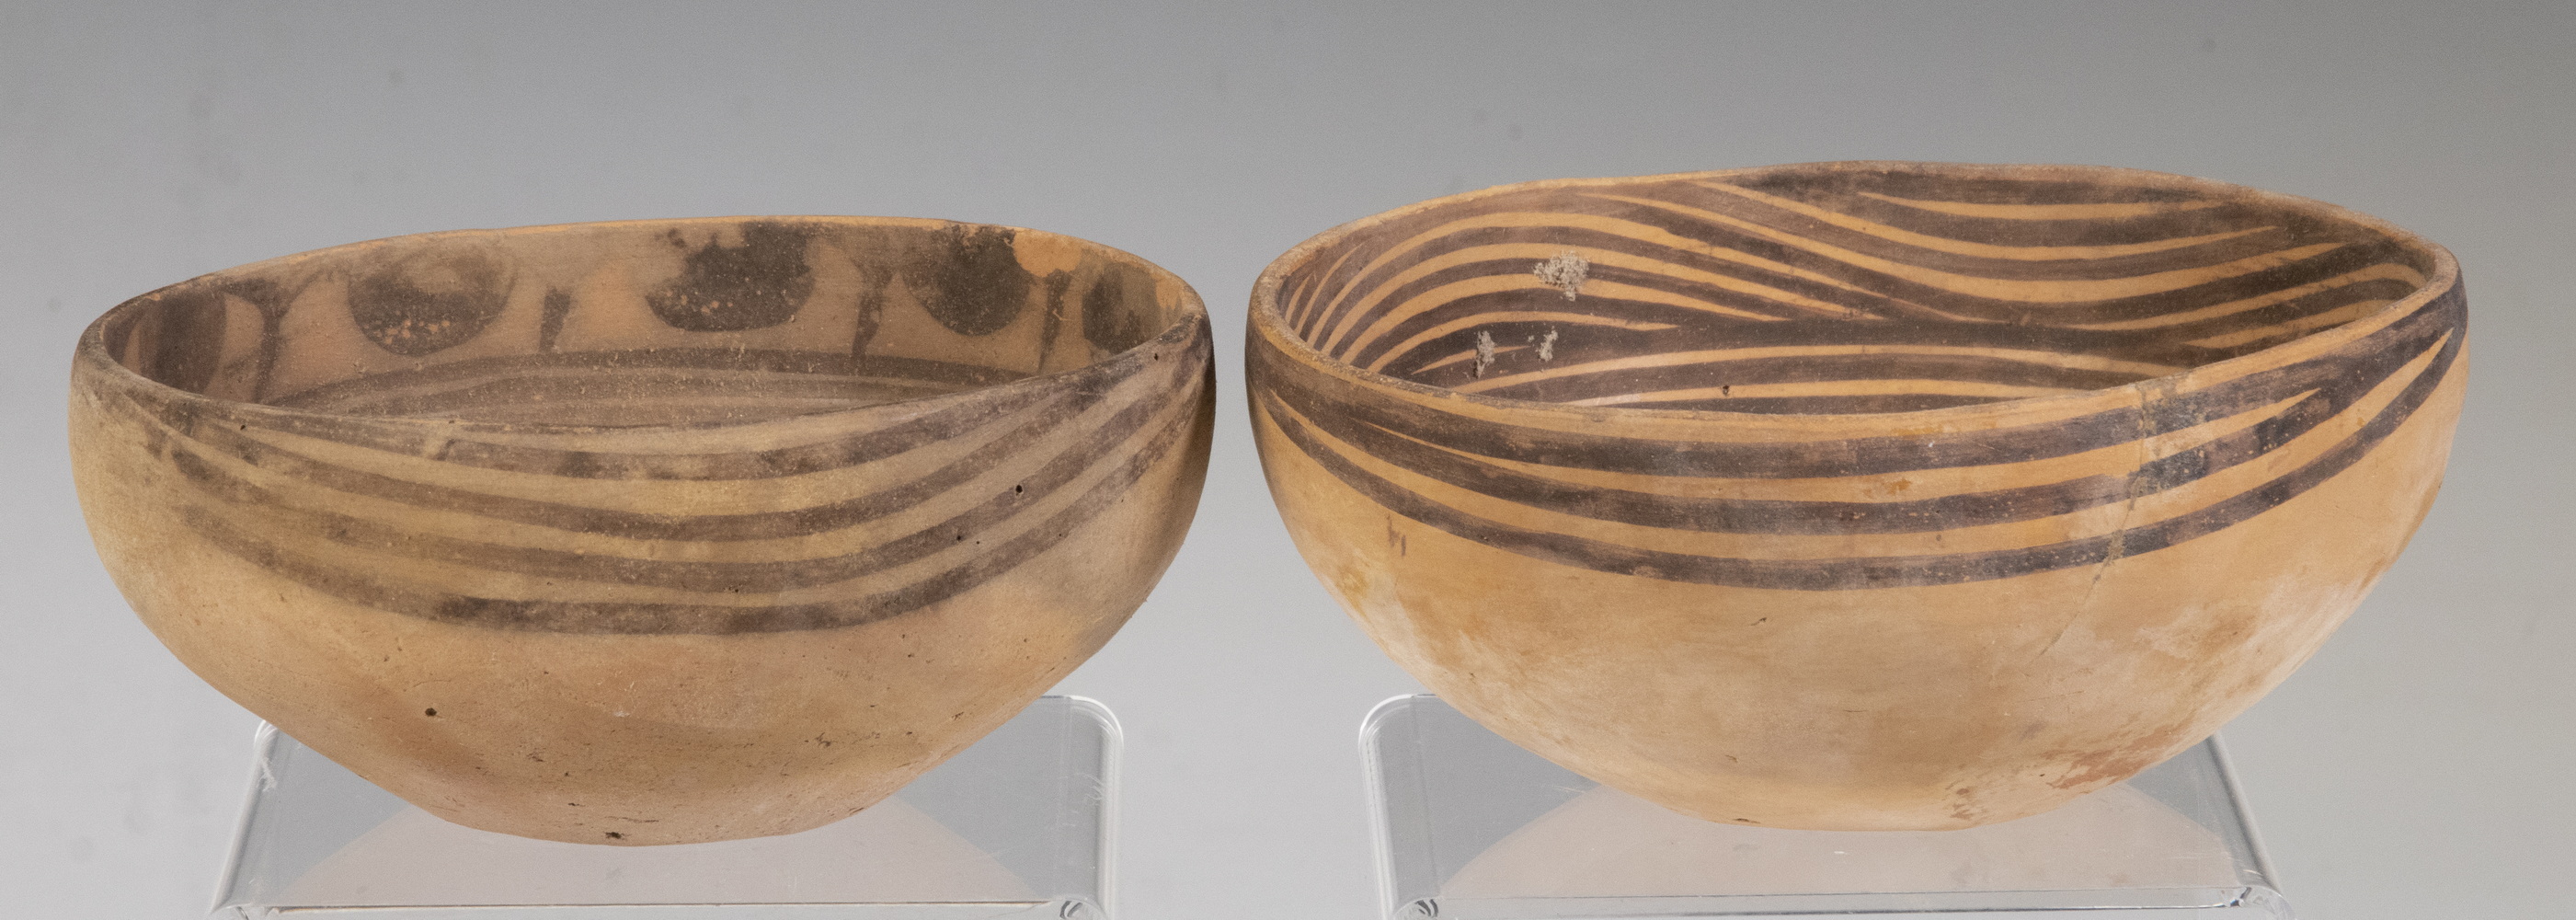  2 CHINESE NEOLITHIC POTTERY BOWLS  2b3d0f